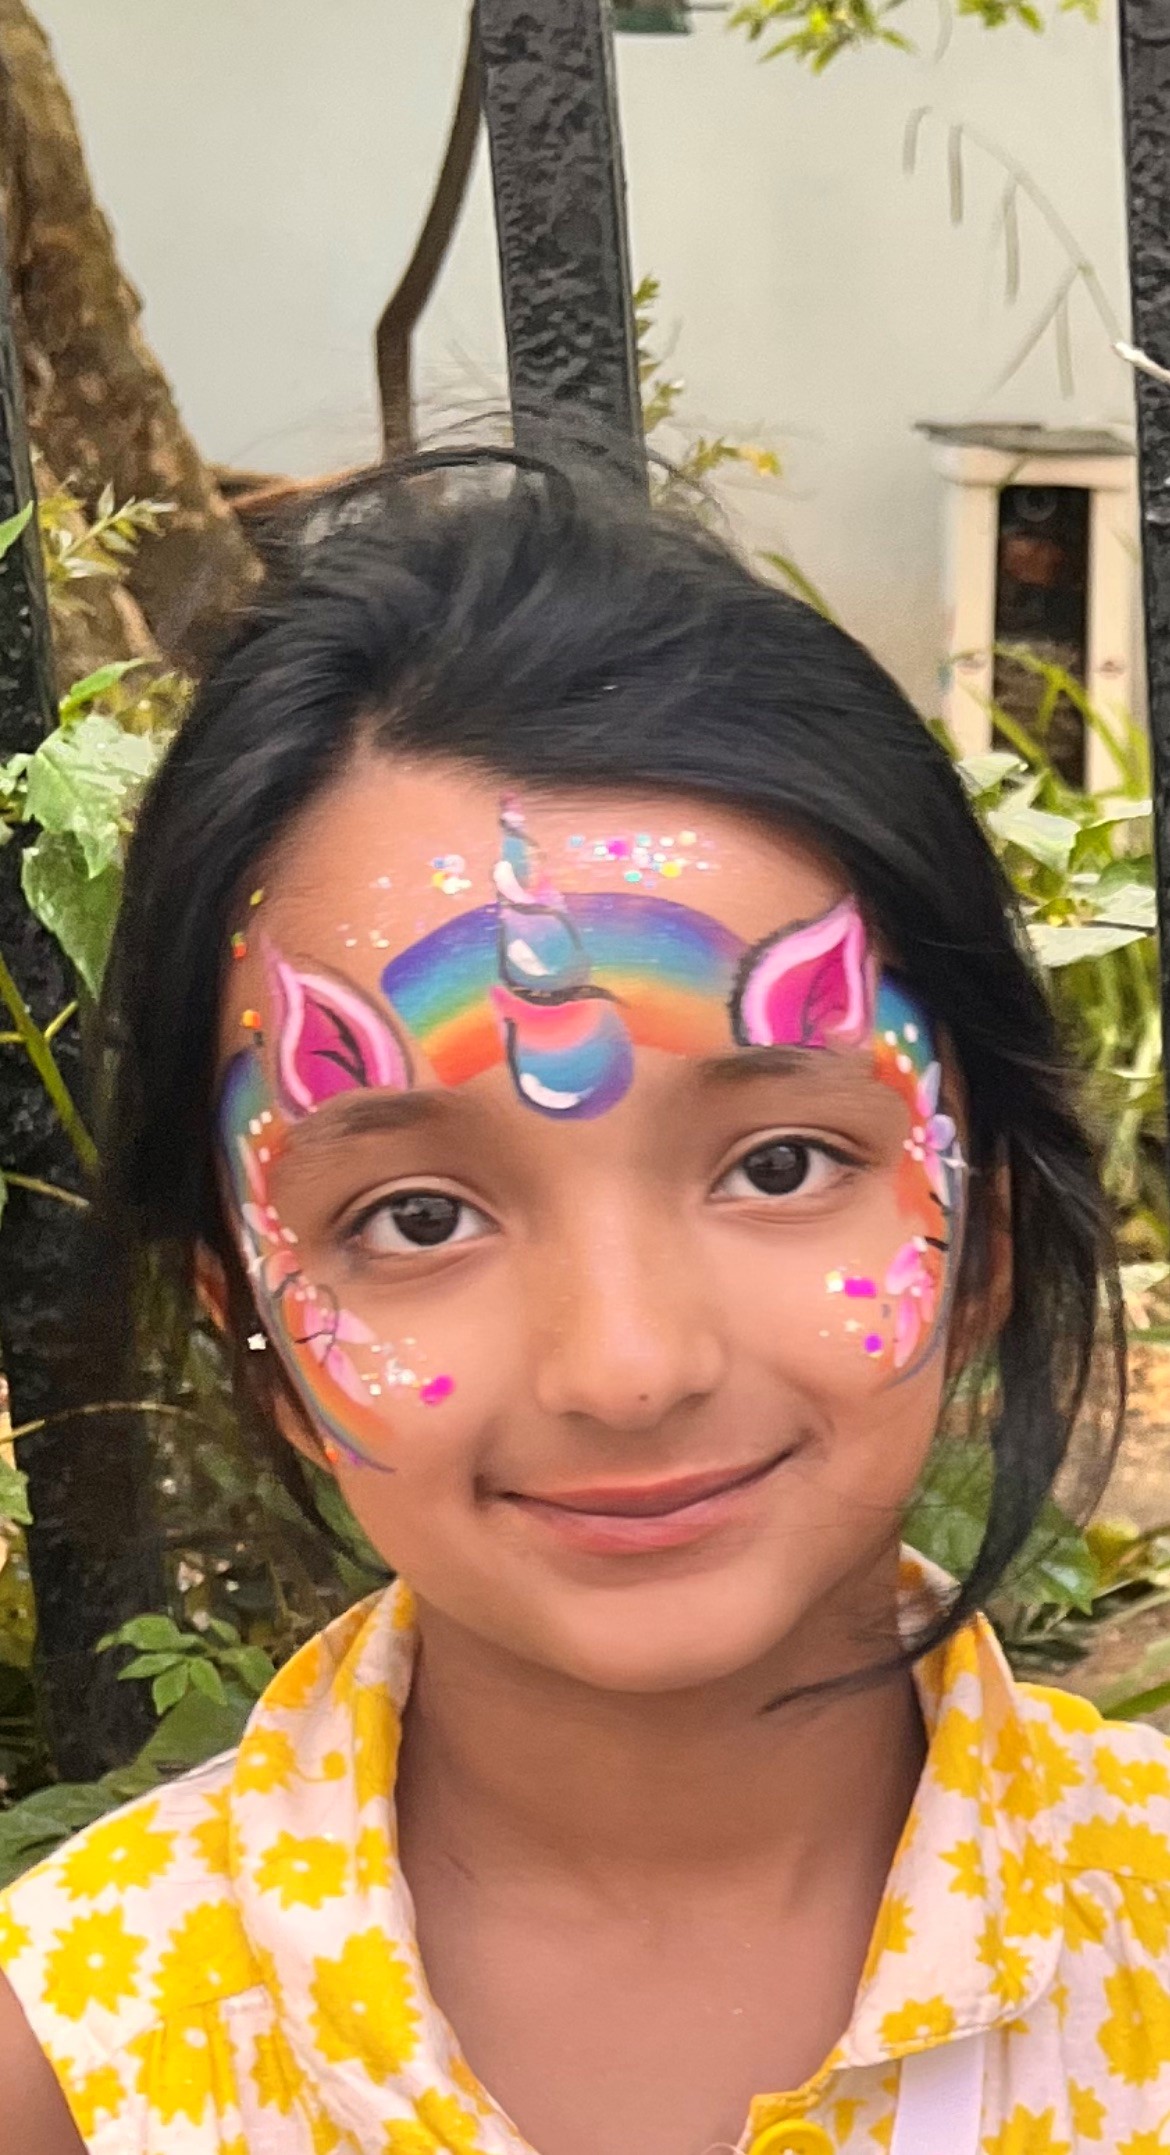 Daya with her face painted as a unicorn